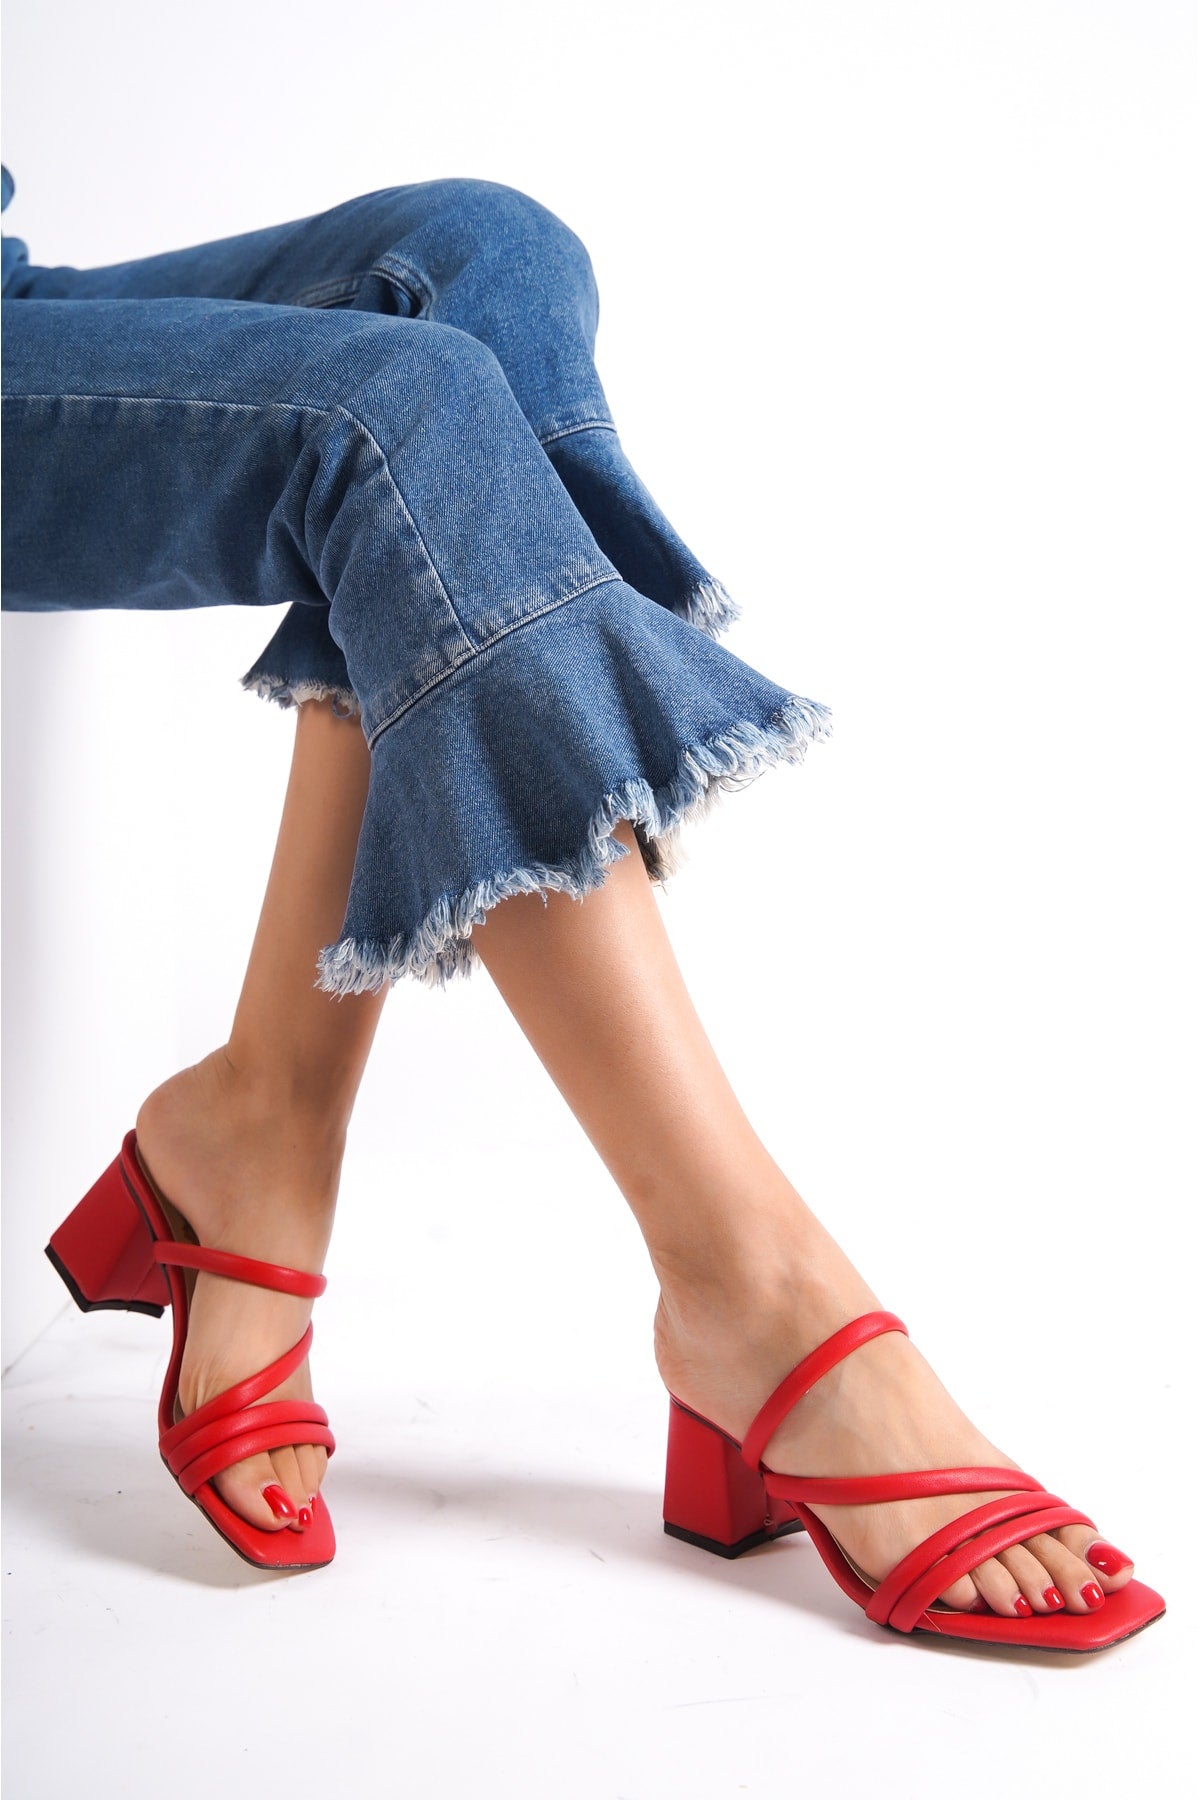 Women's Red Heeled Slippers Sandals Ba20888